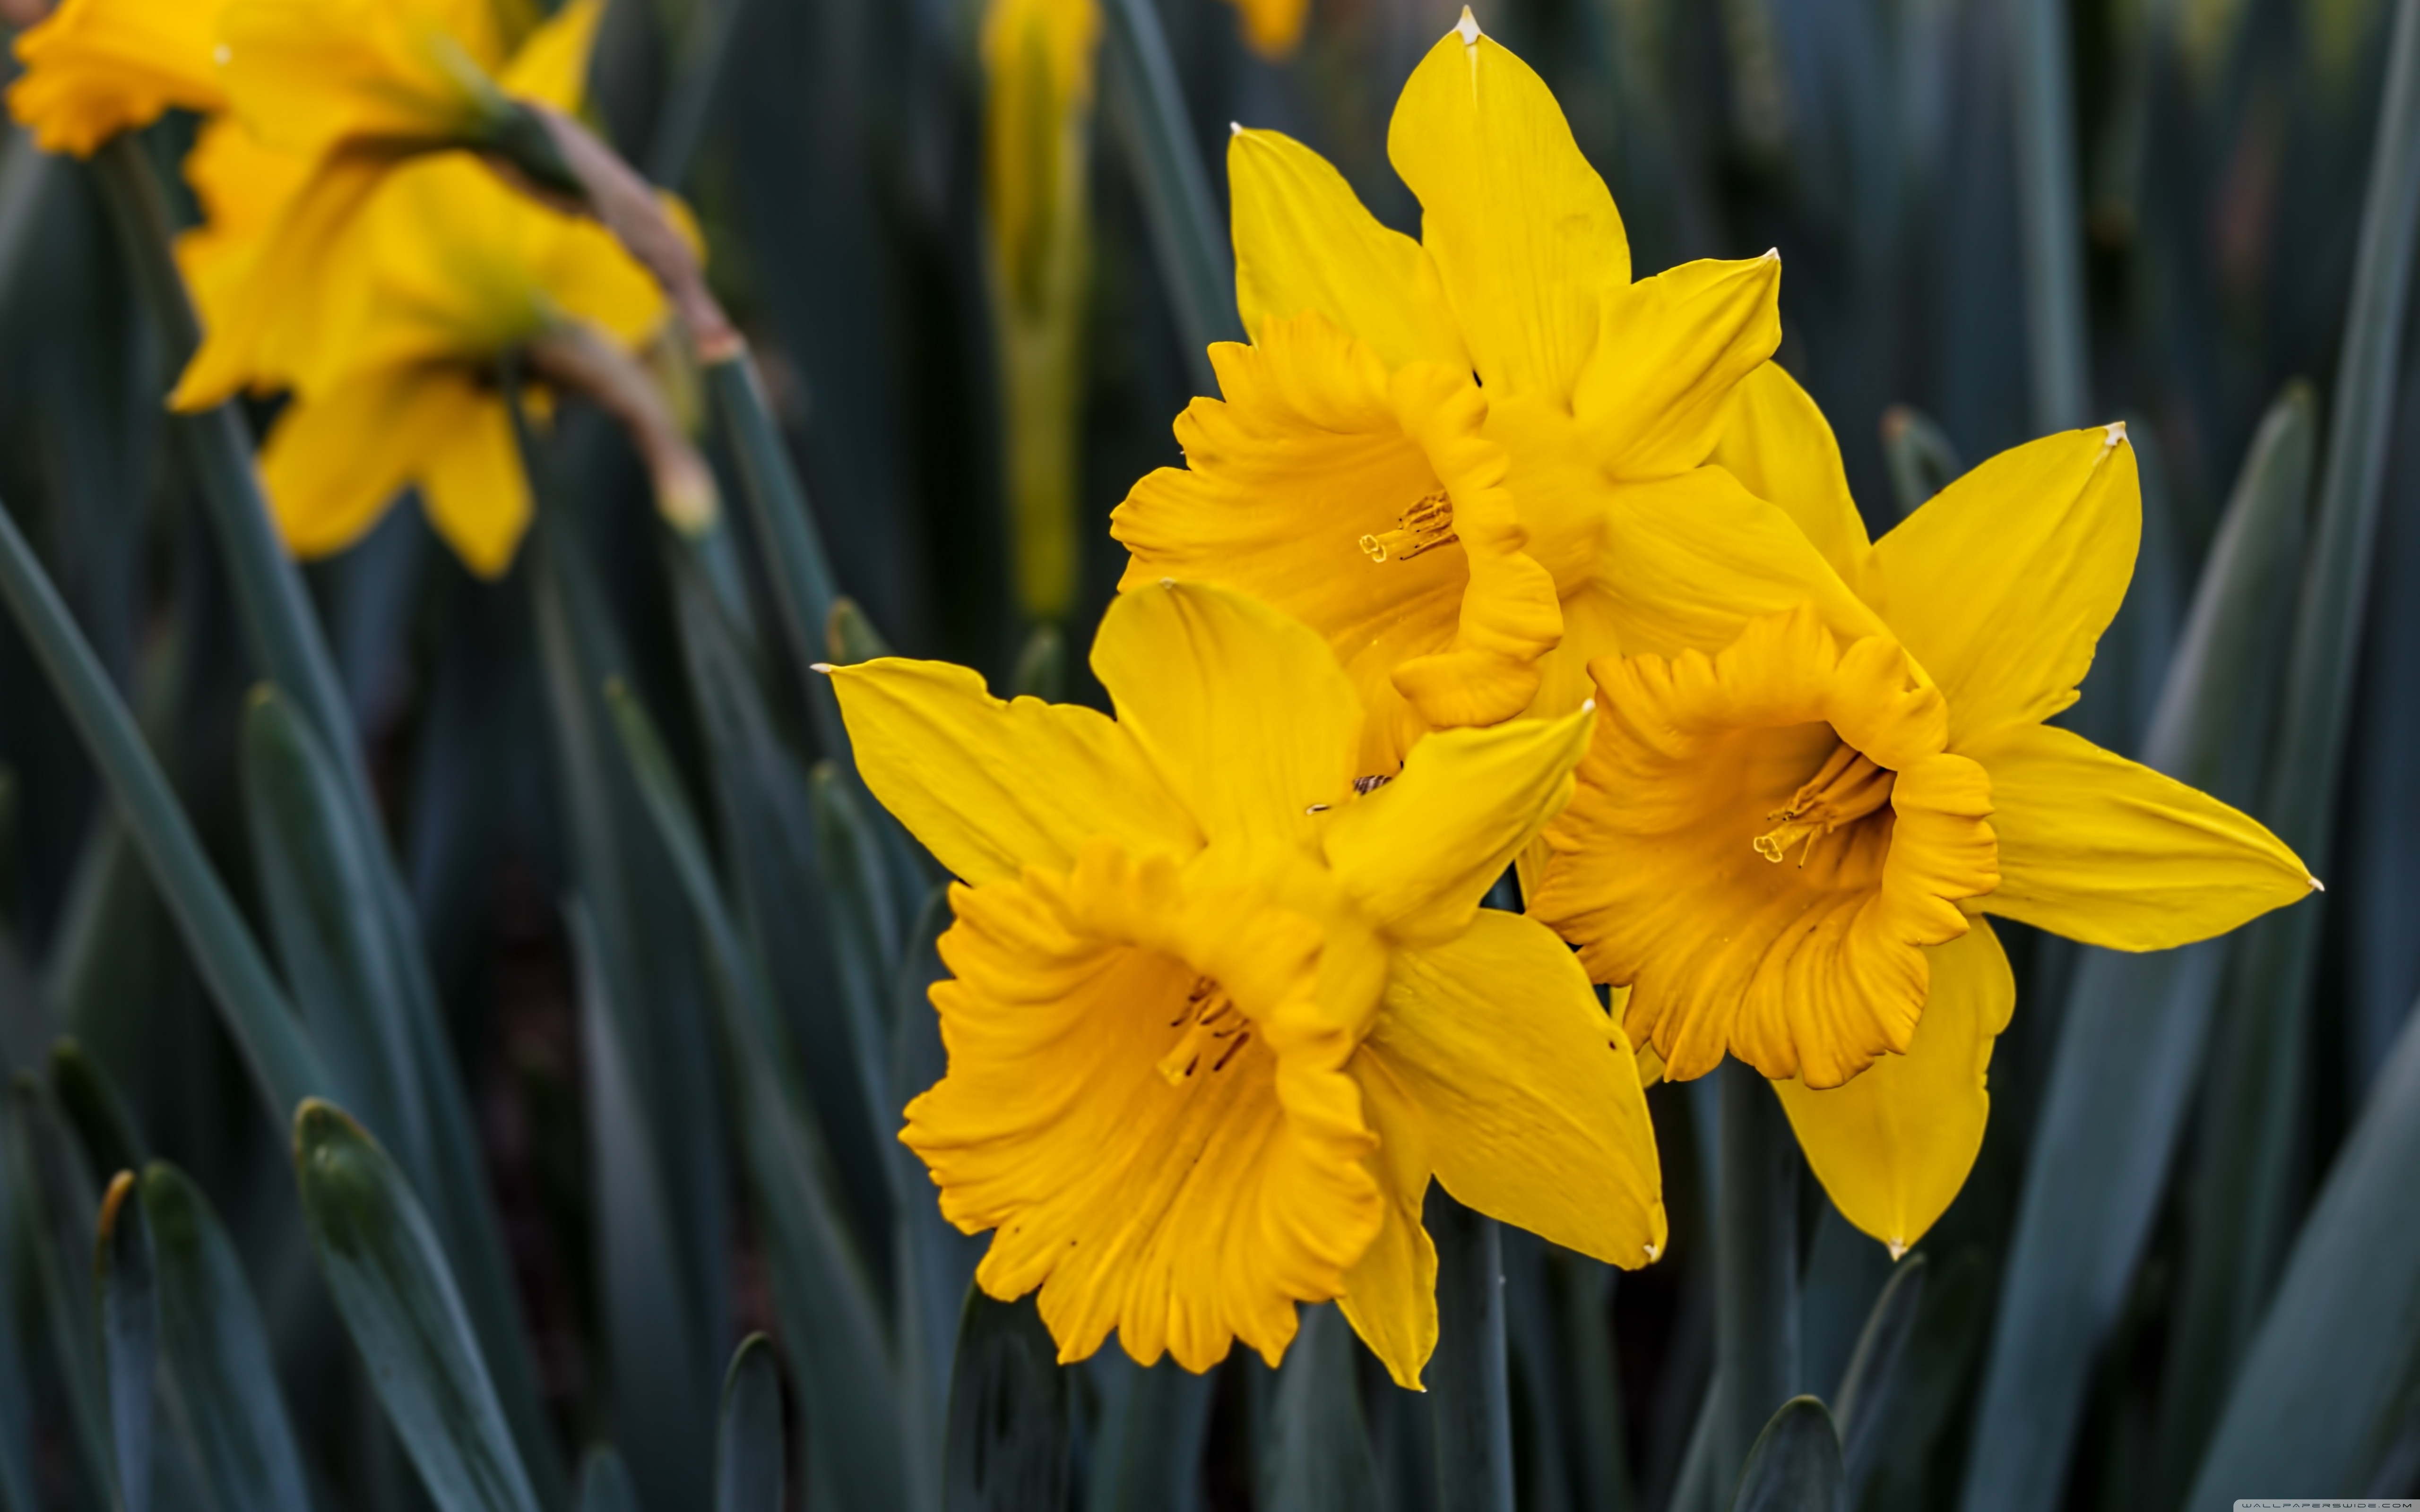 Daffodils Wallpapers 1305467  Wallpapers13com